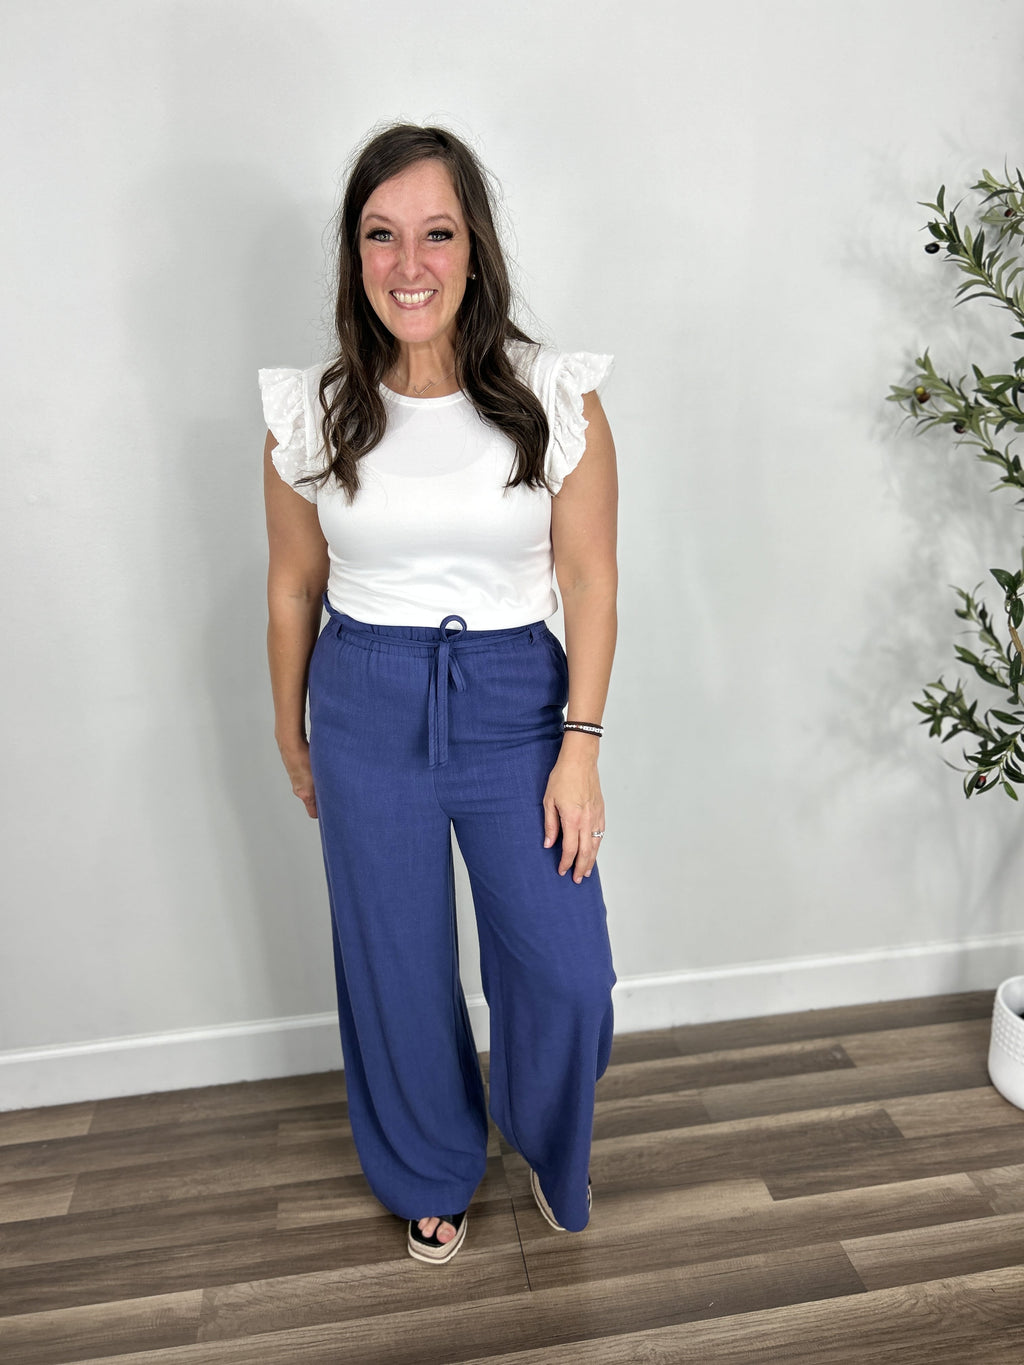 Women's ruffle sleeve white top paired with blue wide leg linen pants and Elvira black wedges.